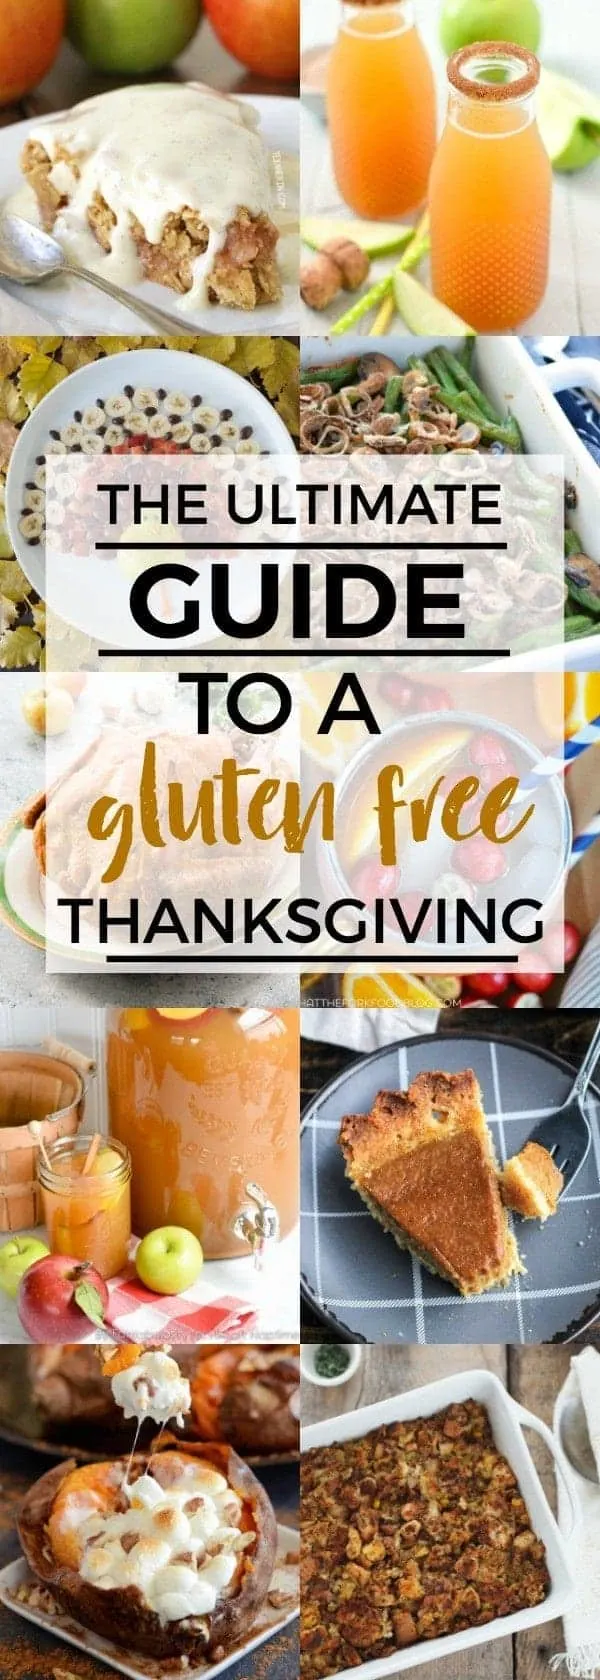 Recipes for the ultimate guide to a gluten free menu plus your ultimate guide to a gluten free Thanksgiving on What The Fork | @whattheforkblog | whattheforkfoodblog.com 